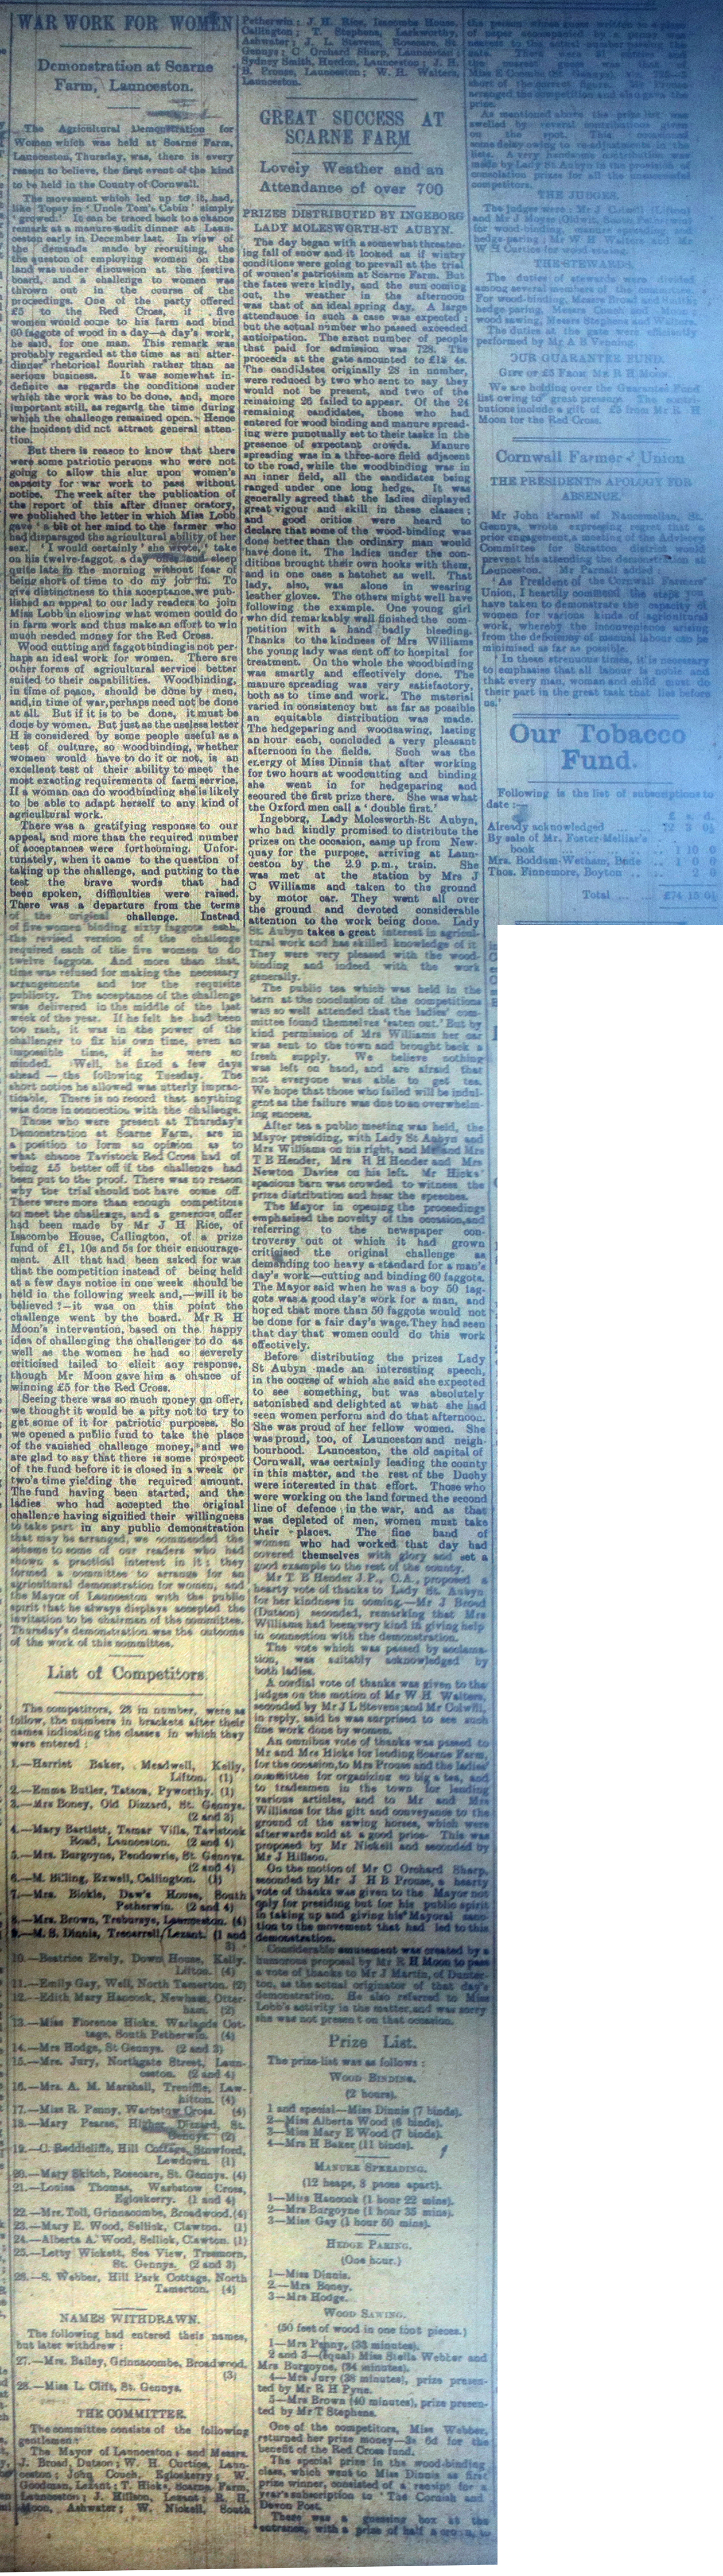 Scarne Demonstration Article March 11th, 1916